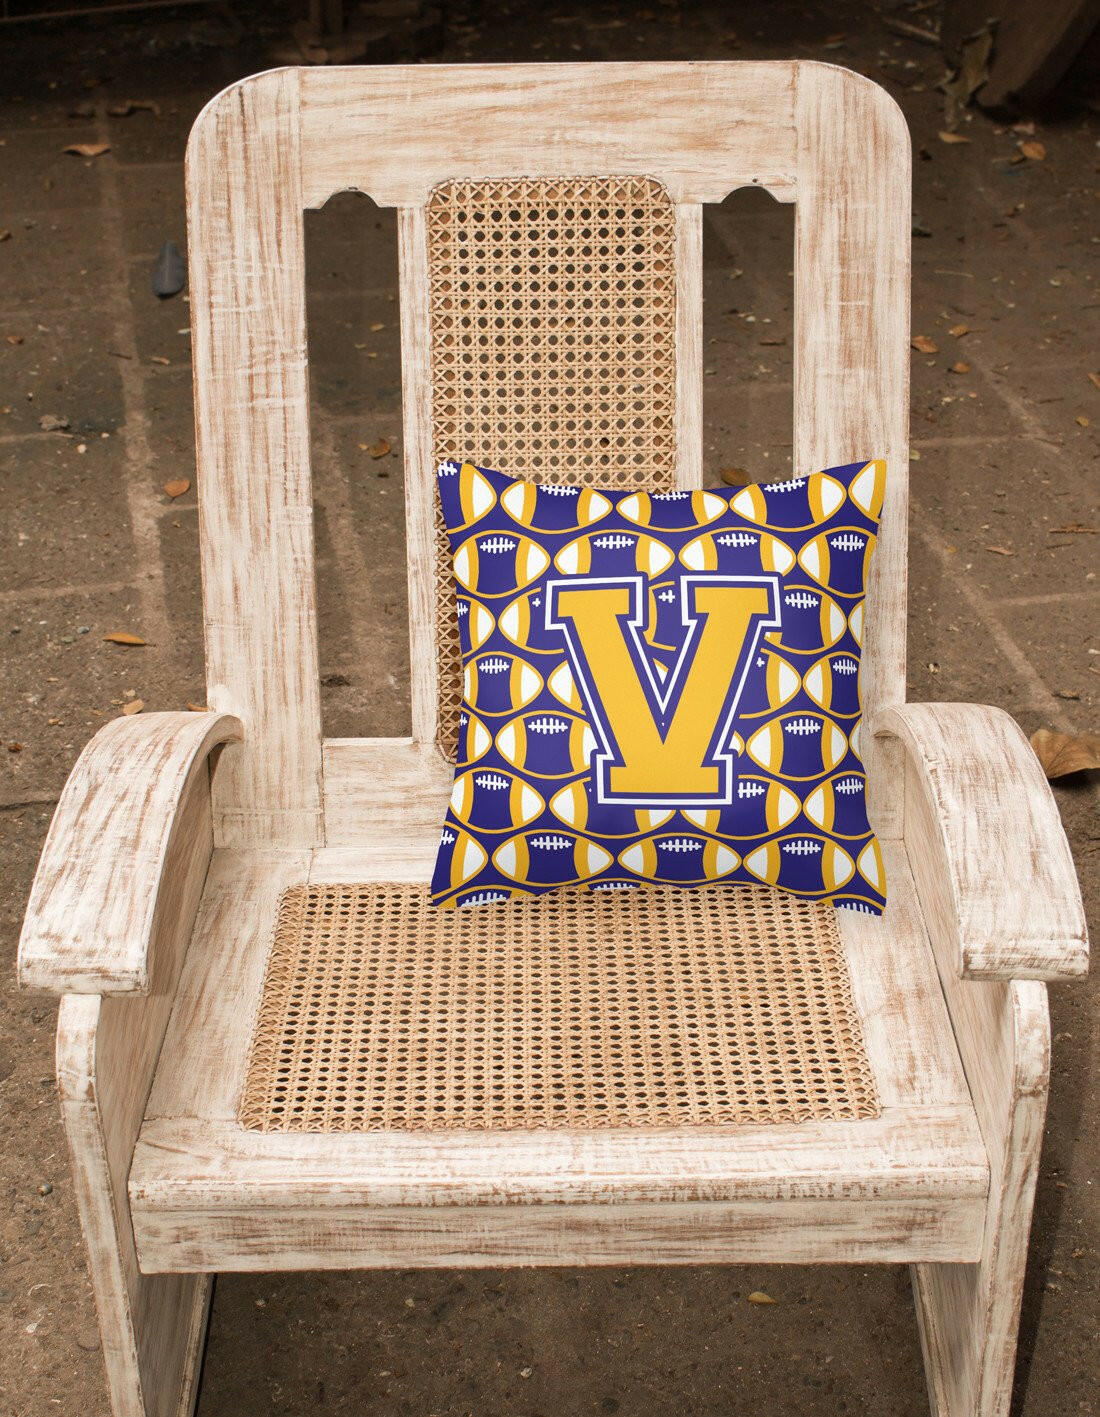 Letter V Football Purple and Gold Fabric Decorative Pillow CJ1064-VPW1414 by Caroline's Treasures